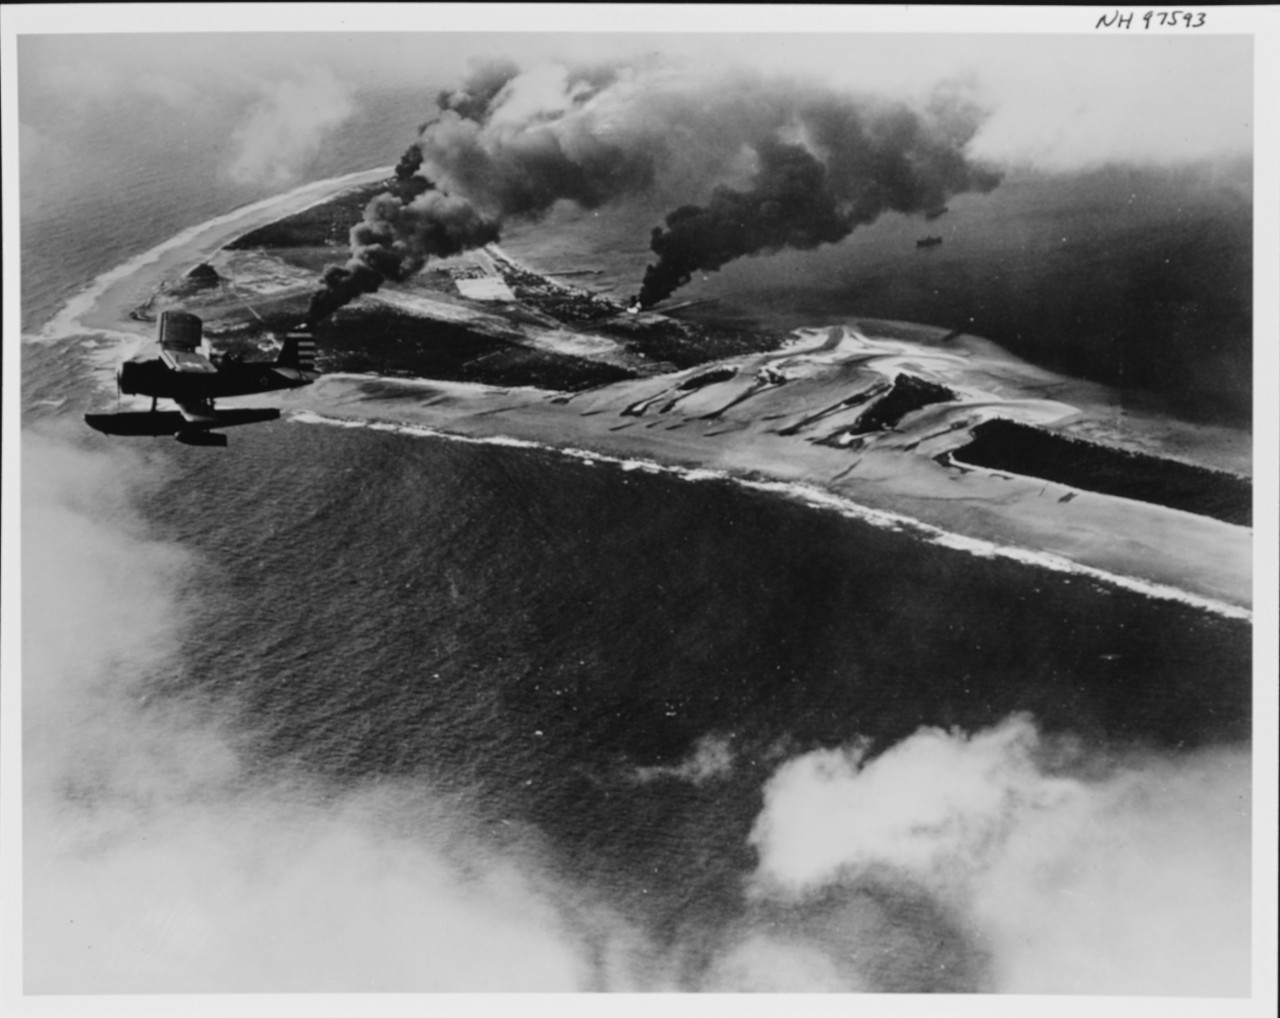 An SOC-1 Seagull of Cruiser Scouting Squadron (VCS) 5 observes the fall of shot as Northampton and Salt Lake City pound Wotje, 1 February 1942. Fires rise from several Japanese positions, including an ammunition dump and a fuel dump. (U.S. Navy Photograph NH 97593, Naval History and Heritage Command)